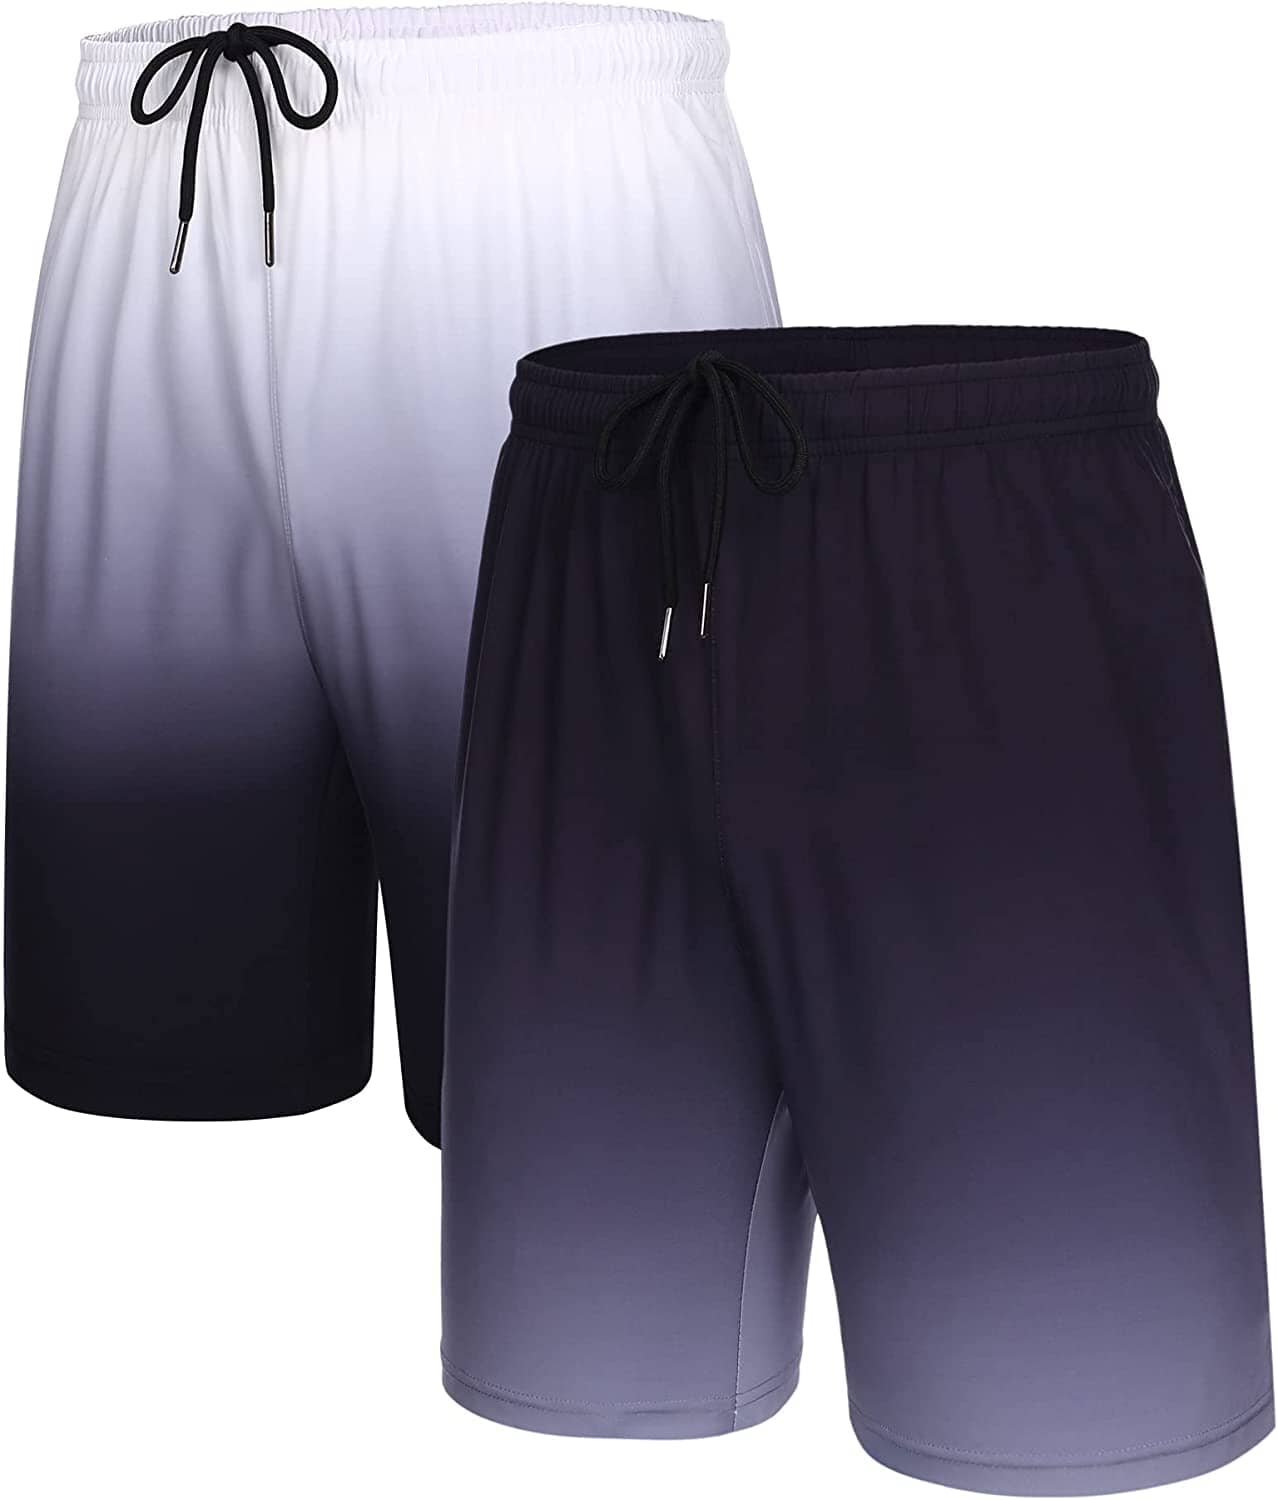 Coofandy Men's 2 Pack Gym Workout Shorts (US Only) Pants coofandy 